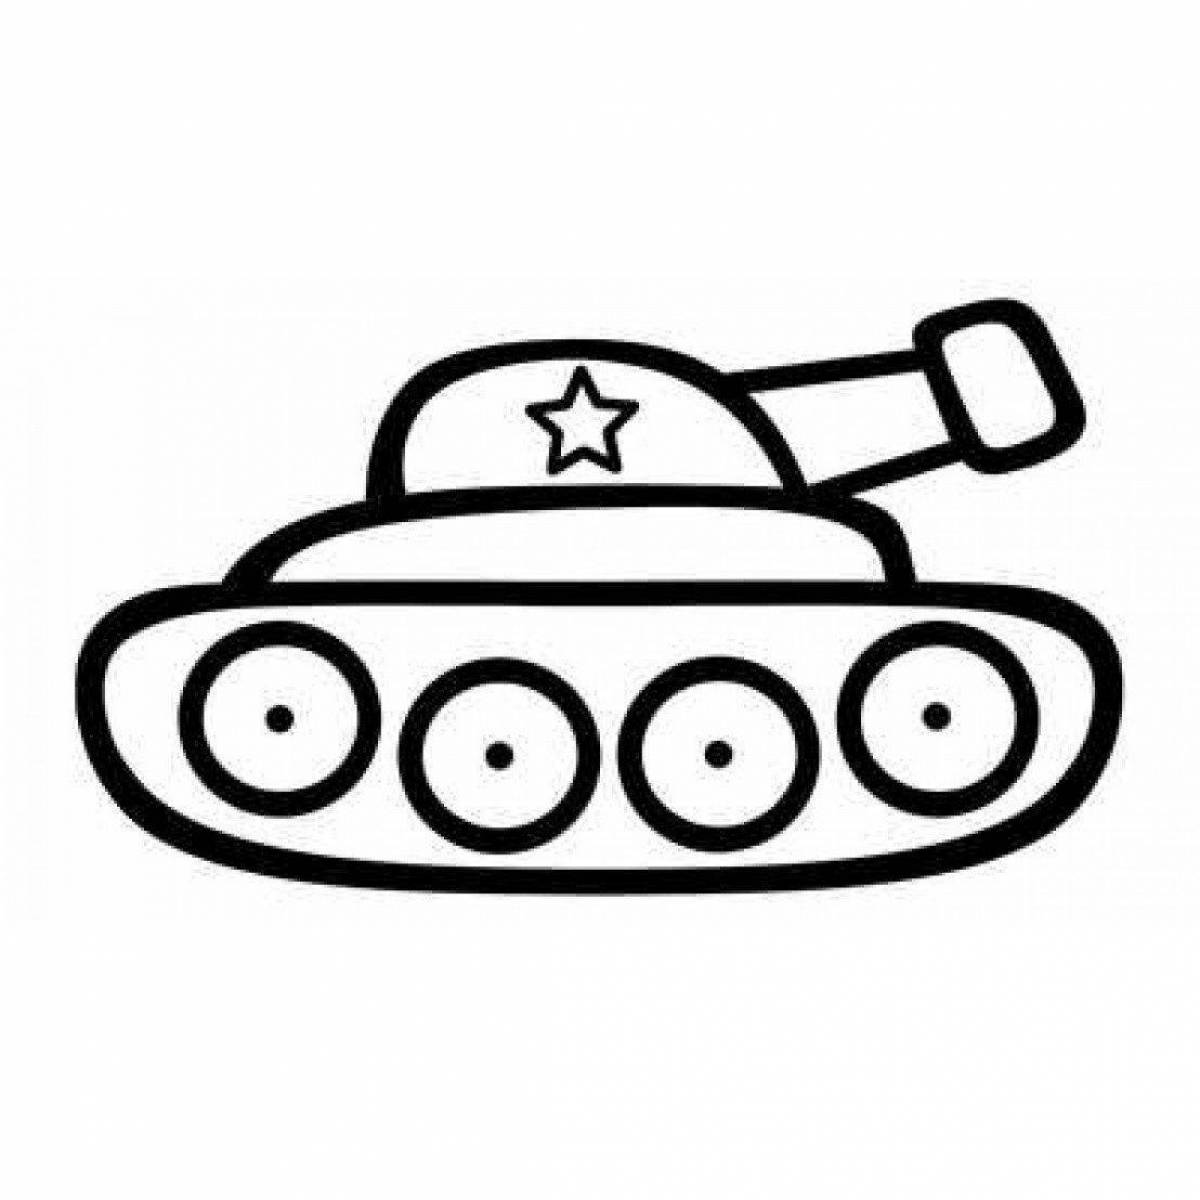 Adorable t34 tank coloring page for kids